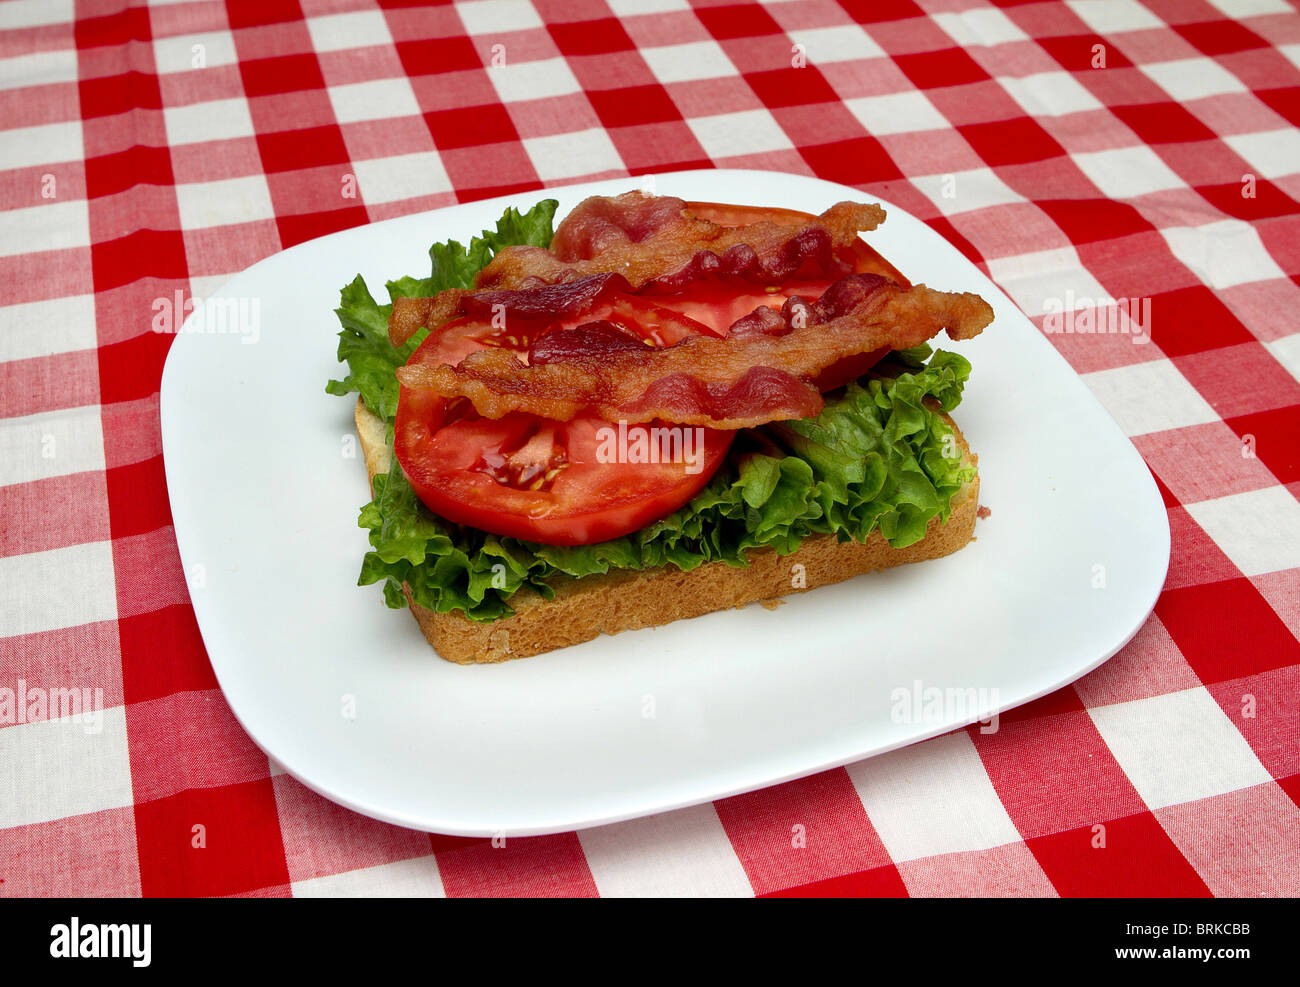 incomplete blt sandwich on a white plate with red checked background Stock Photo